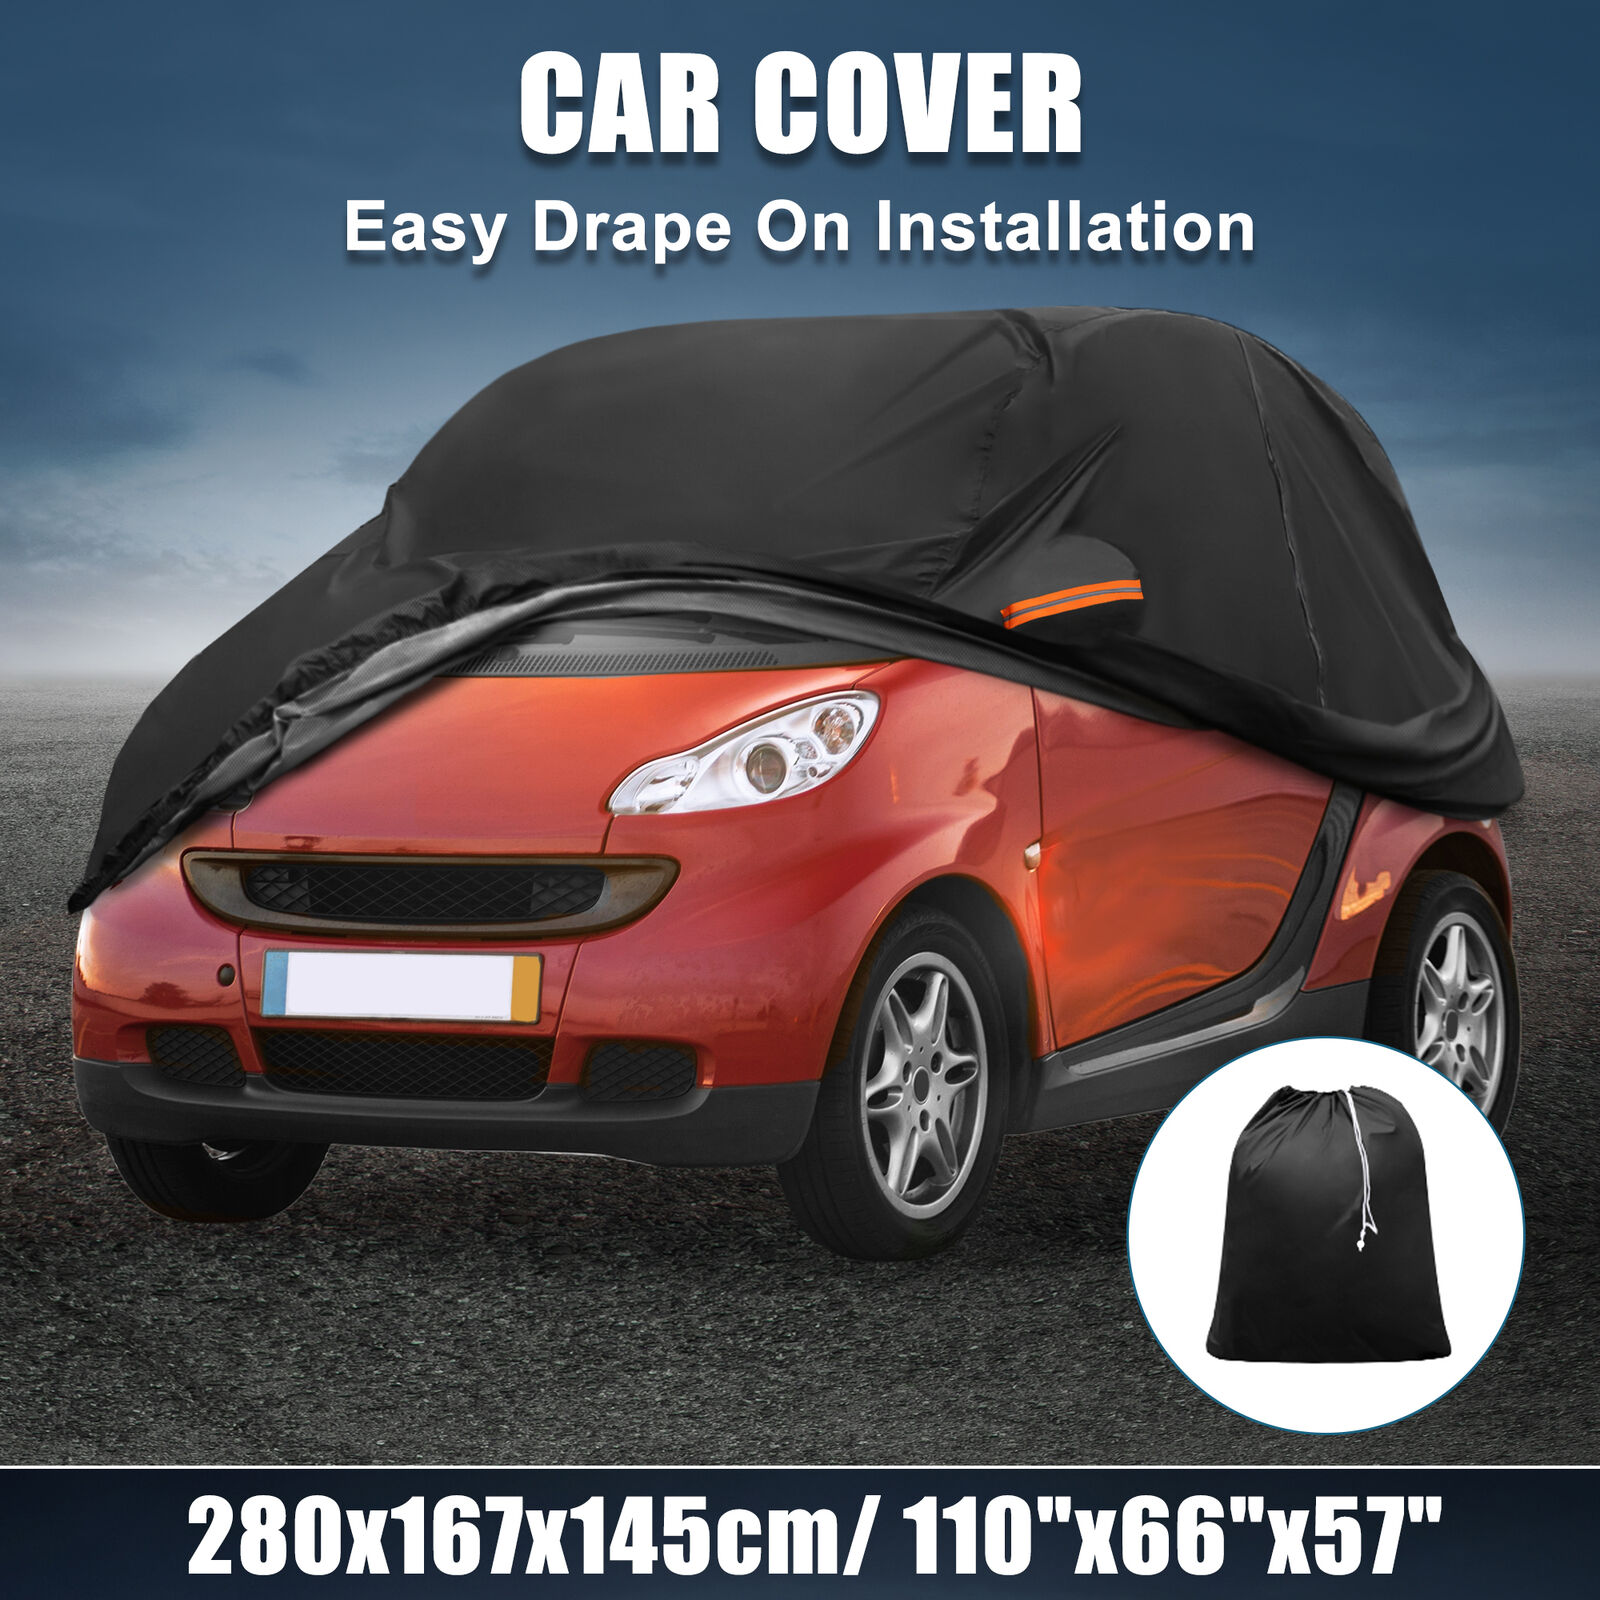 Waterproof 210D-PU Oxford Car Cover for Smart Fortwo 07-23 with Zipper Black